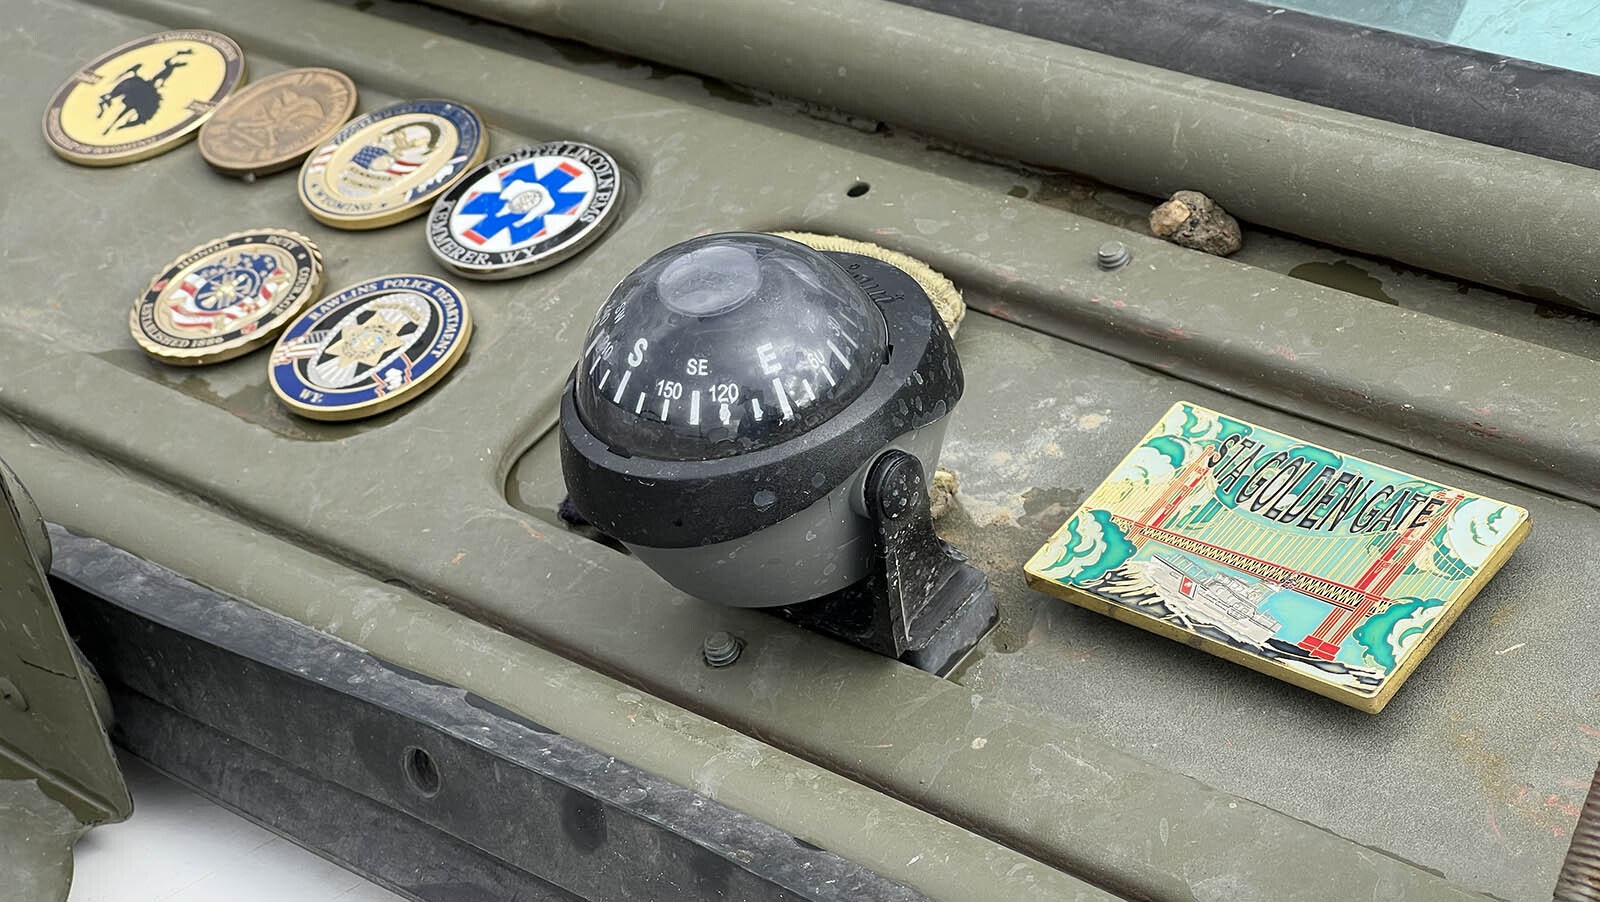 The dash of the 1952 Willys Jeep displays the military coins from various stops along its cross-country trip, starting at the Golden Gate Bridge.